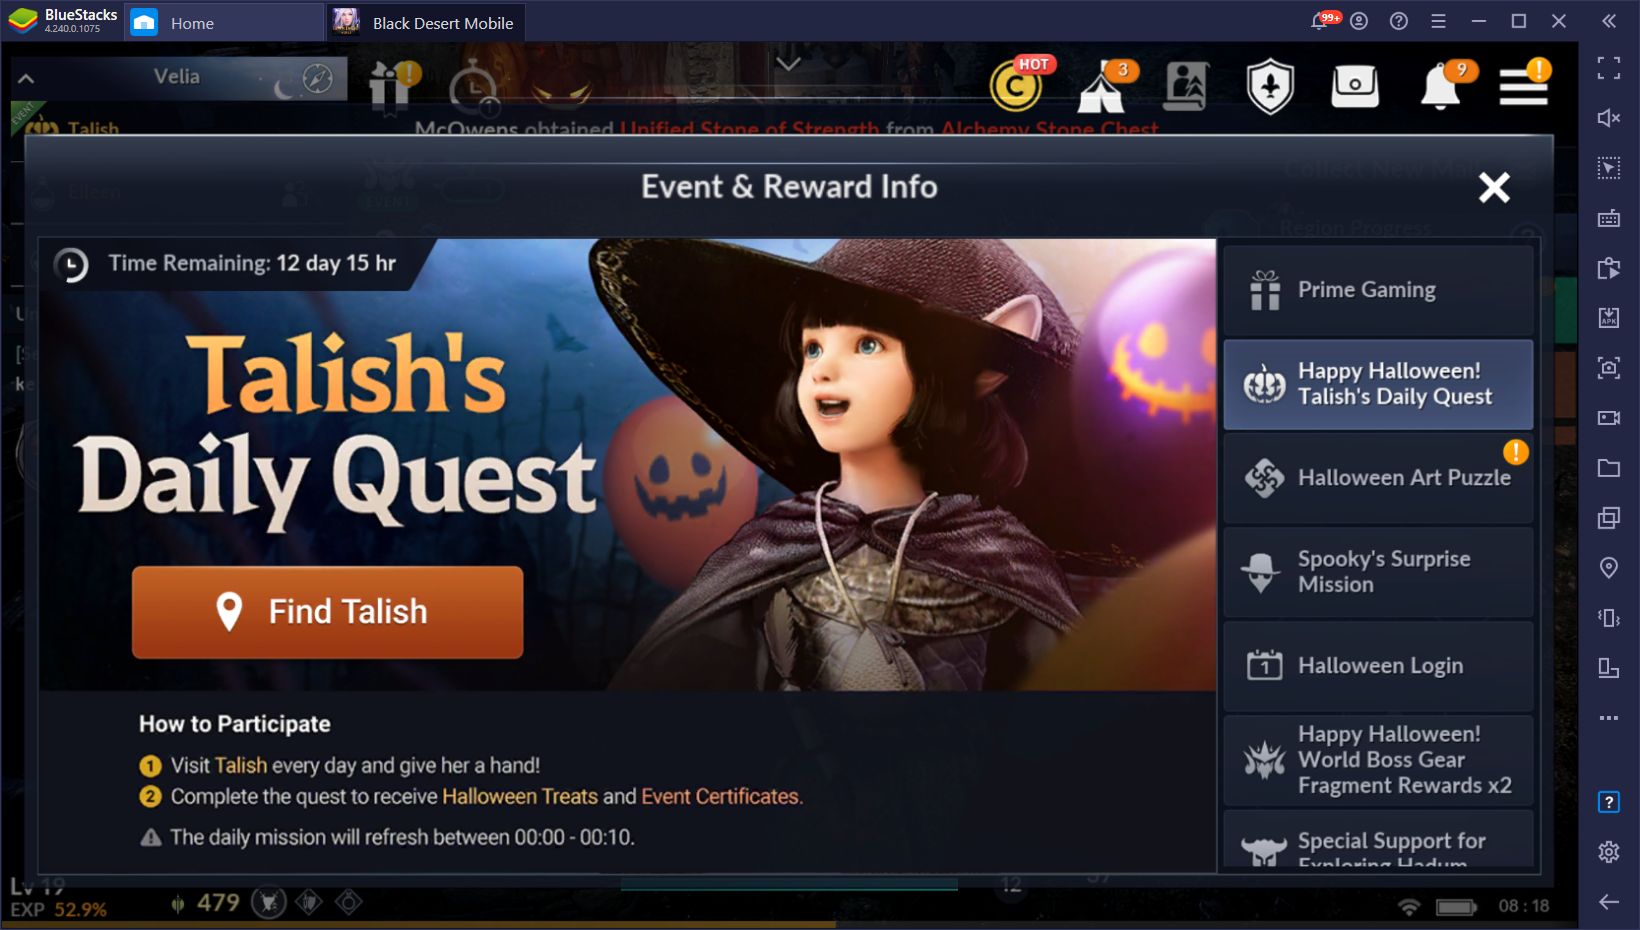 Black Desert Mobile Halloween Events 2020 Bring Tons of Prizes to the Popular Mobile MMORPG